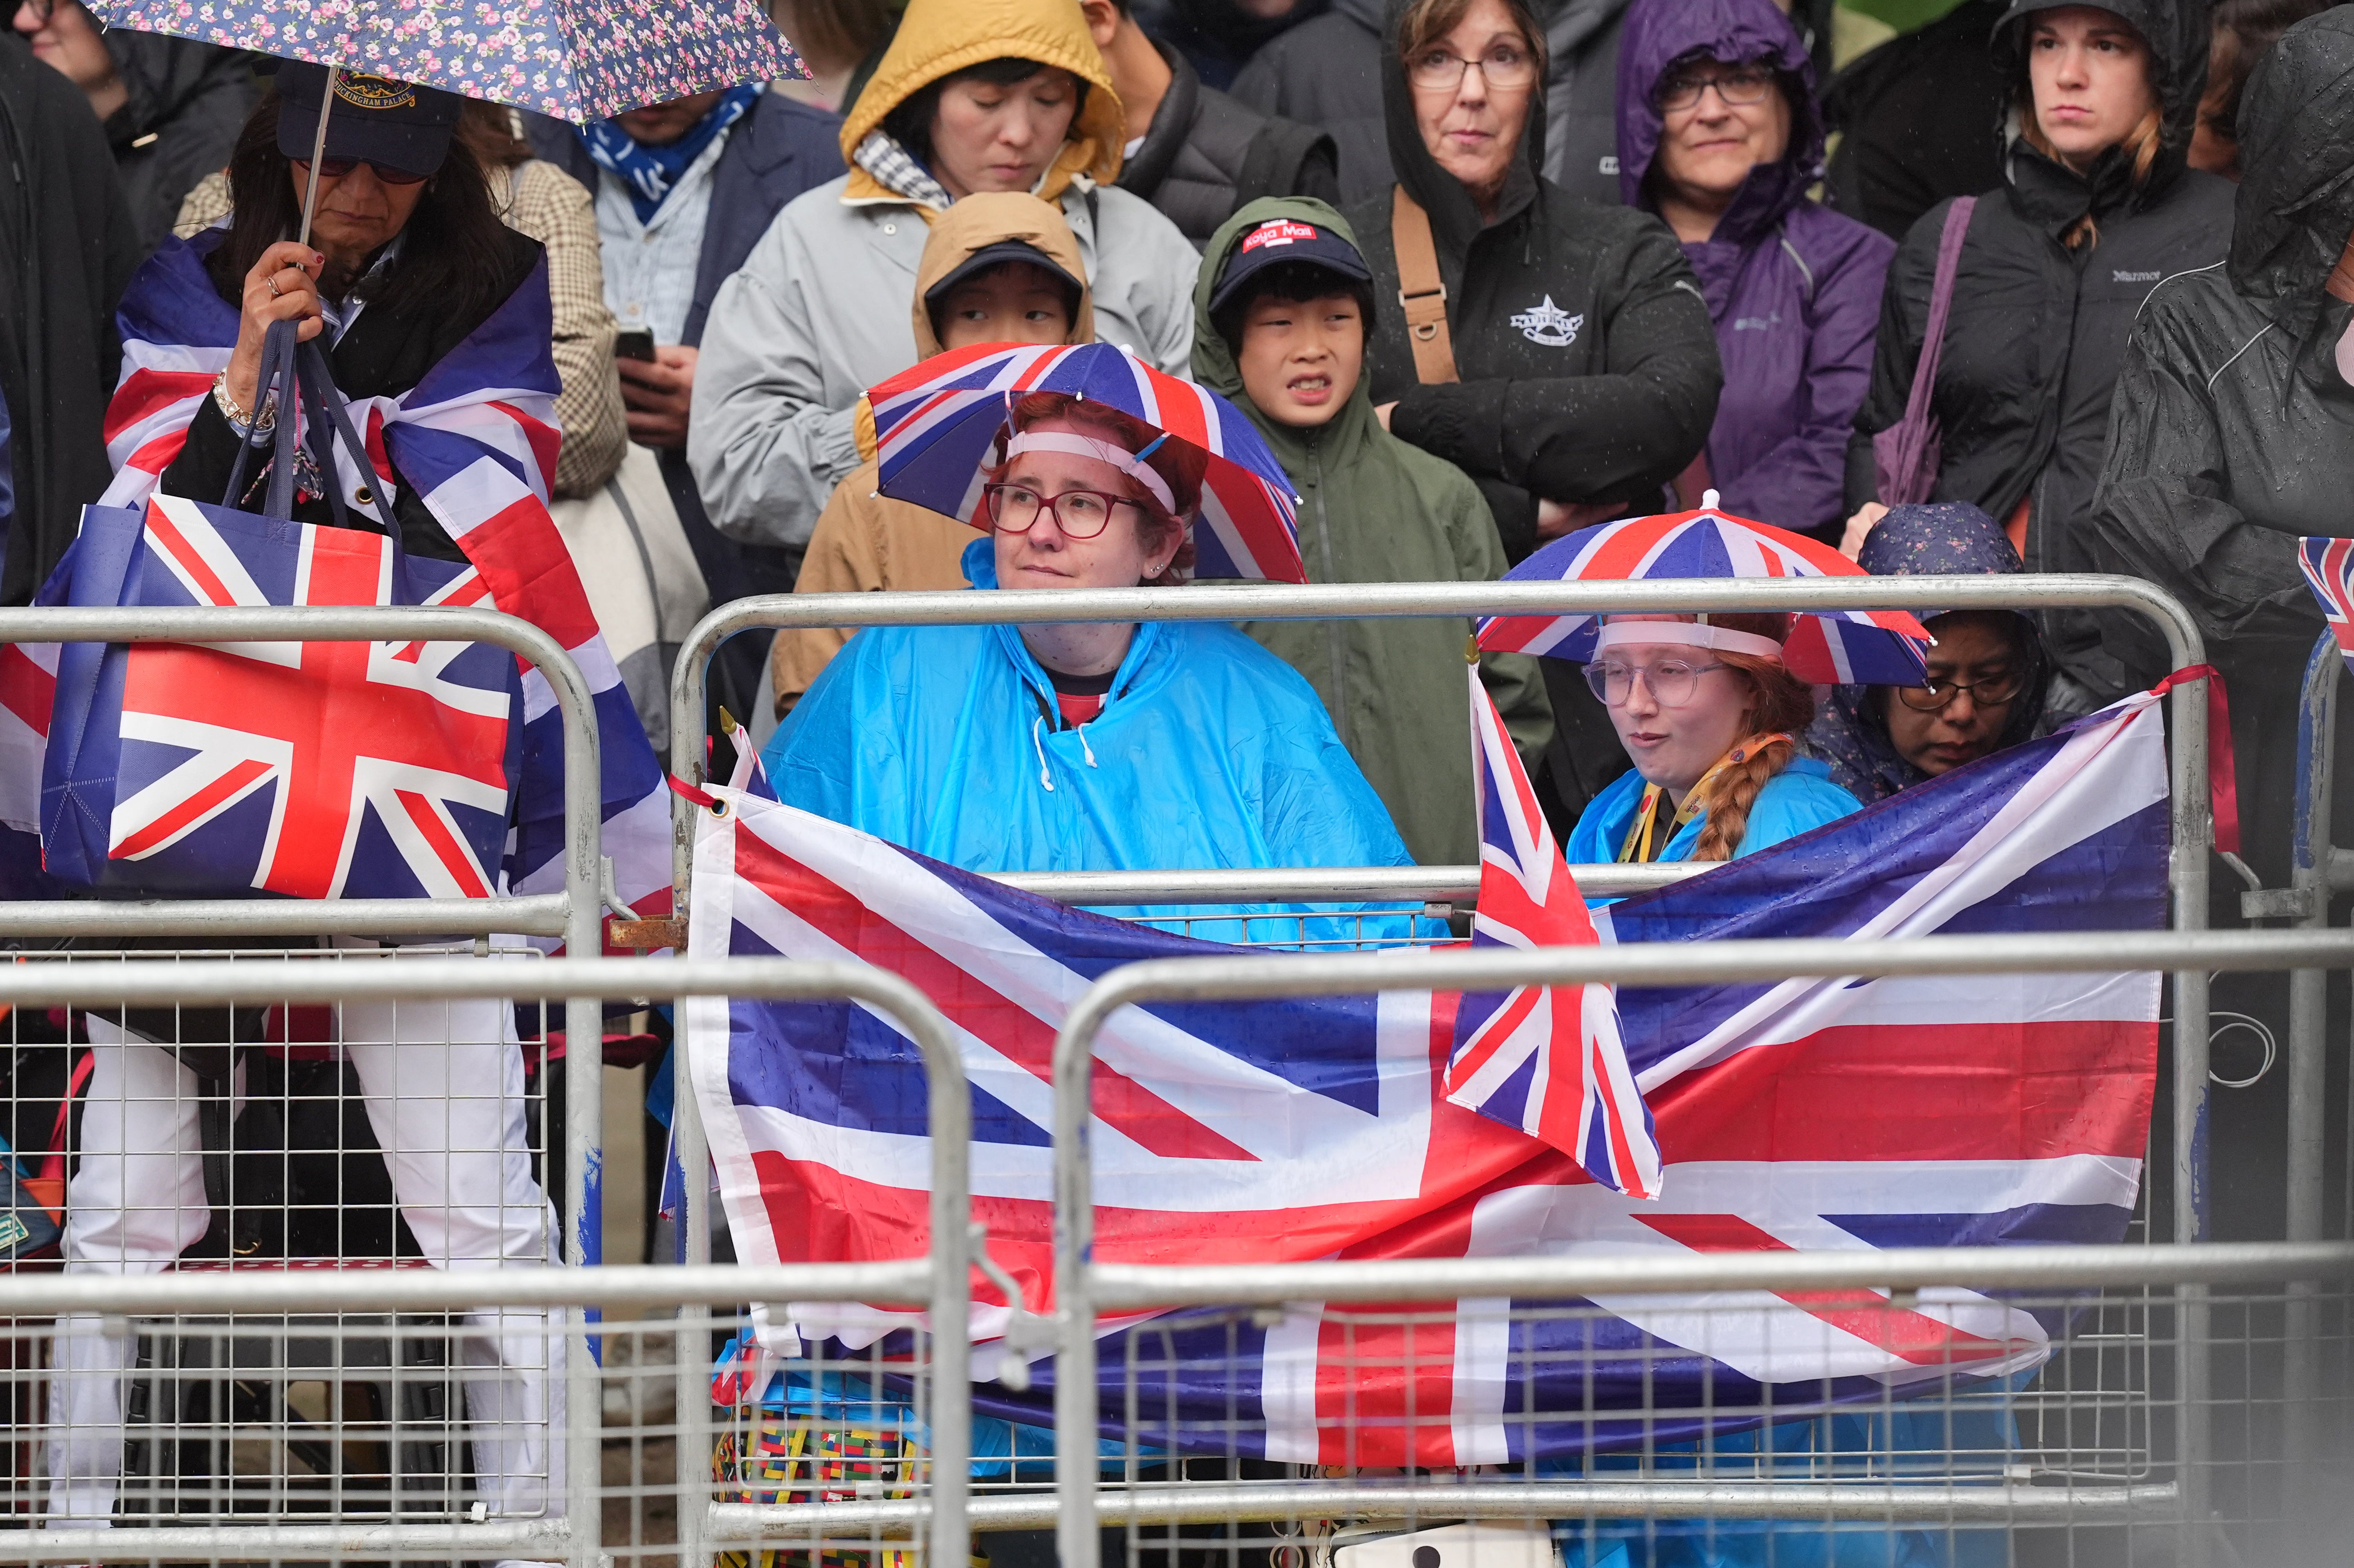 Crowds with umbrellas wait in the rain to see the Royal Family